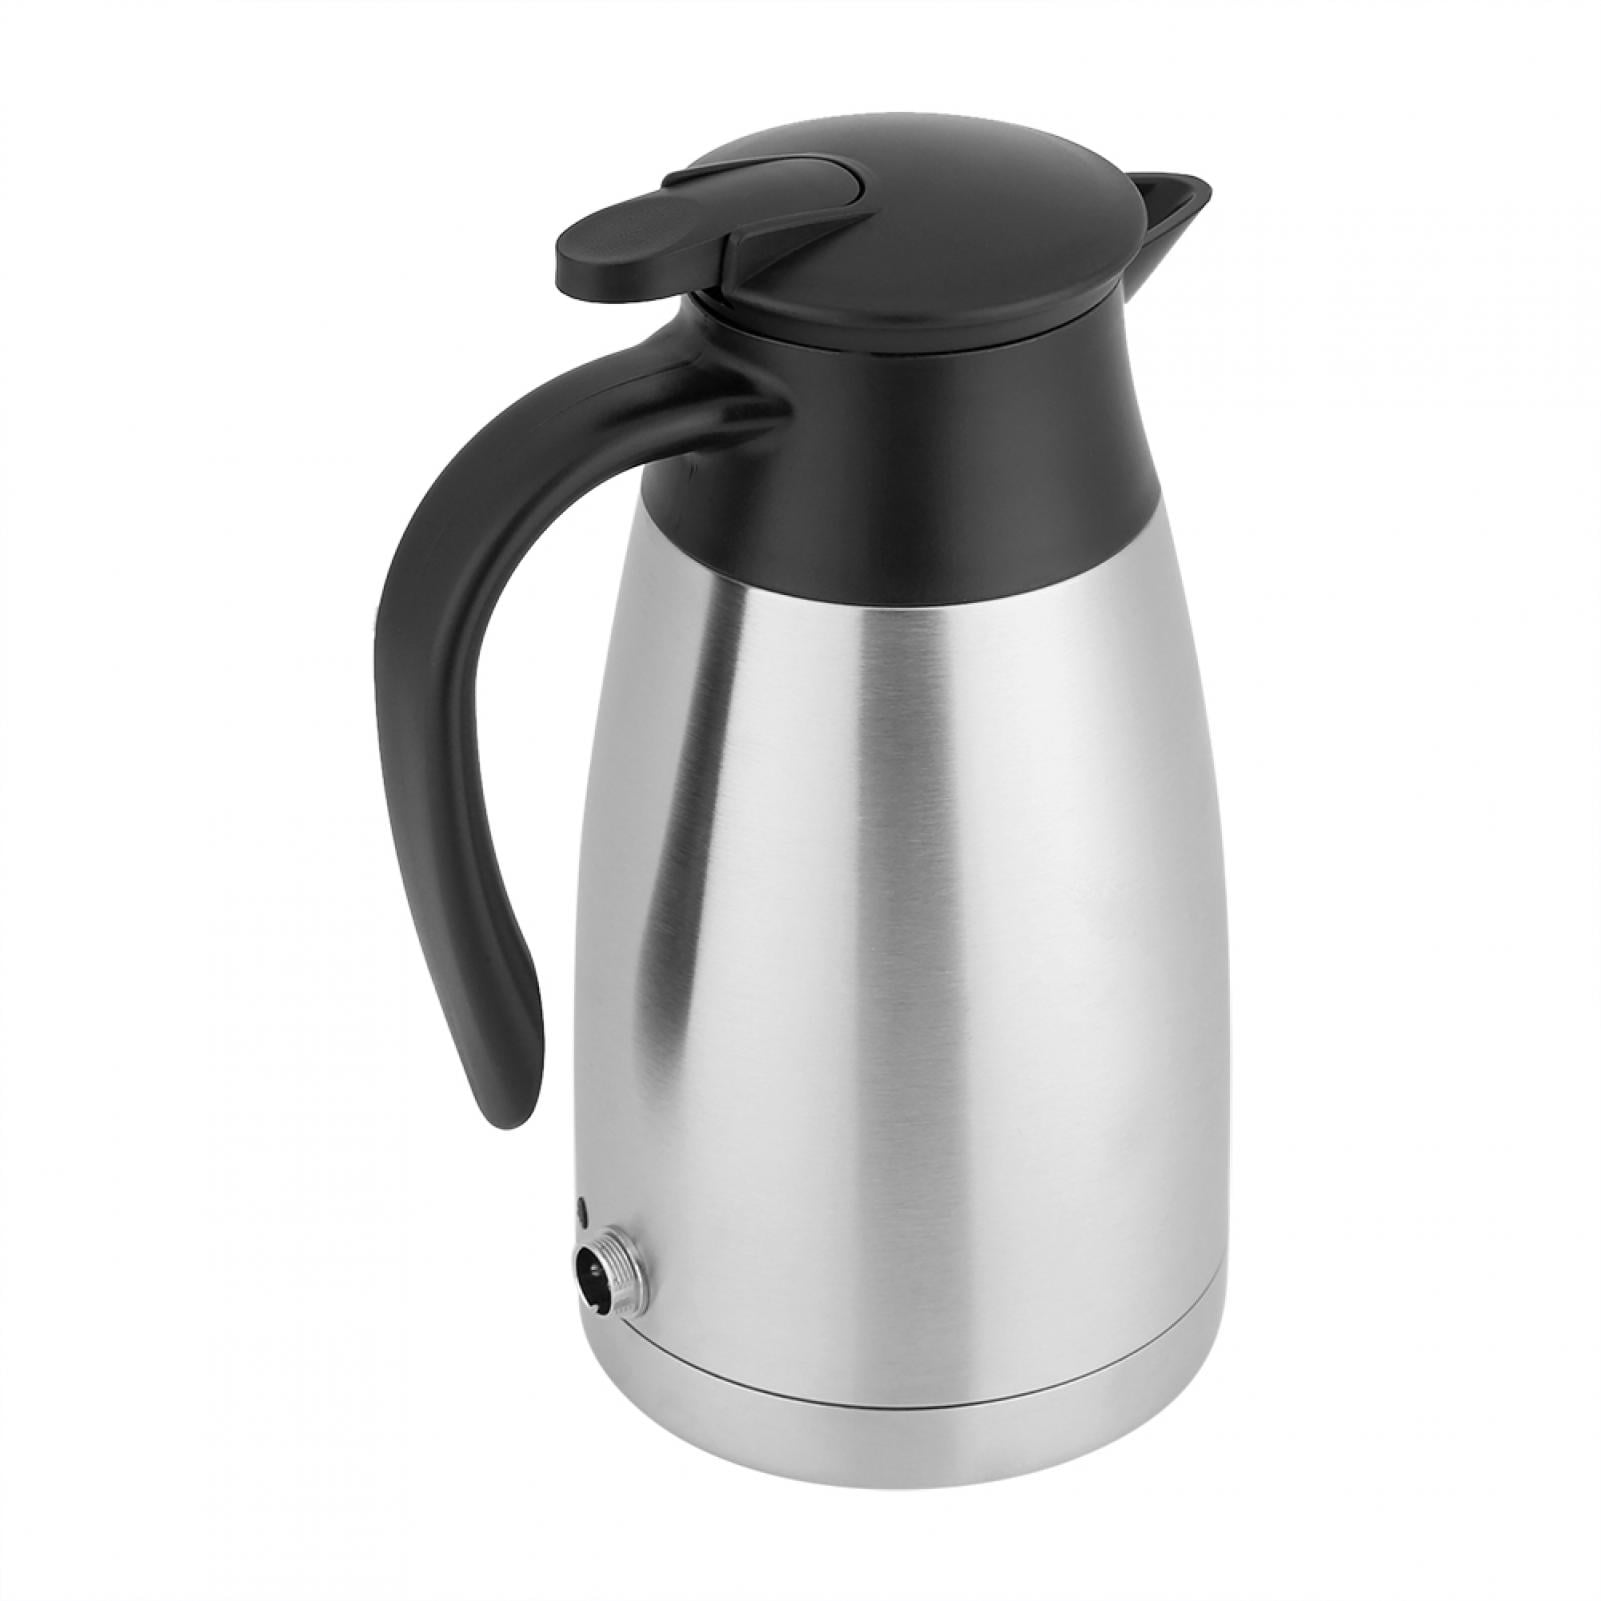 12V Electric Kettle Foldable Portable Travel Car Heated Cup Coffee Tee Water Pot